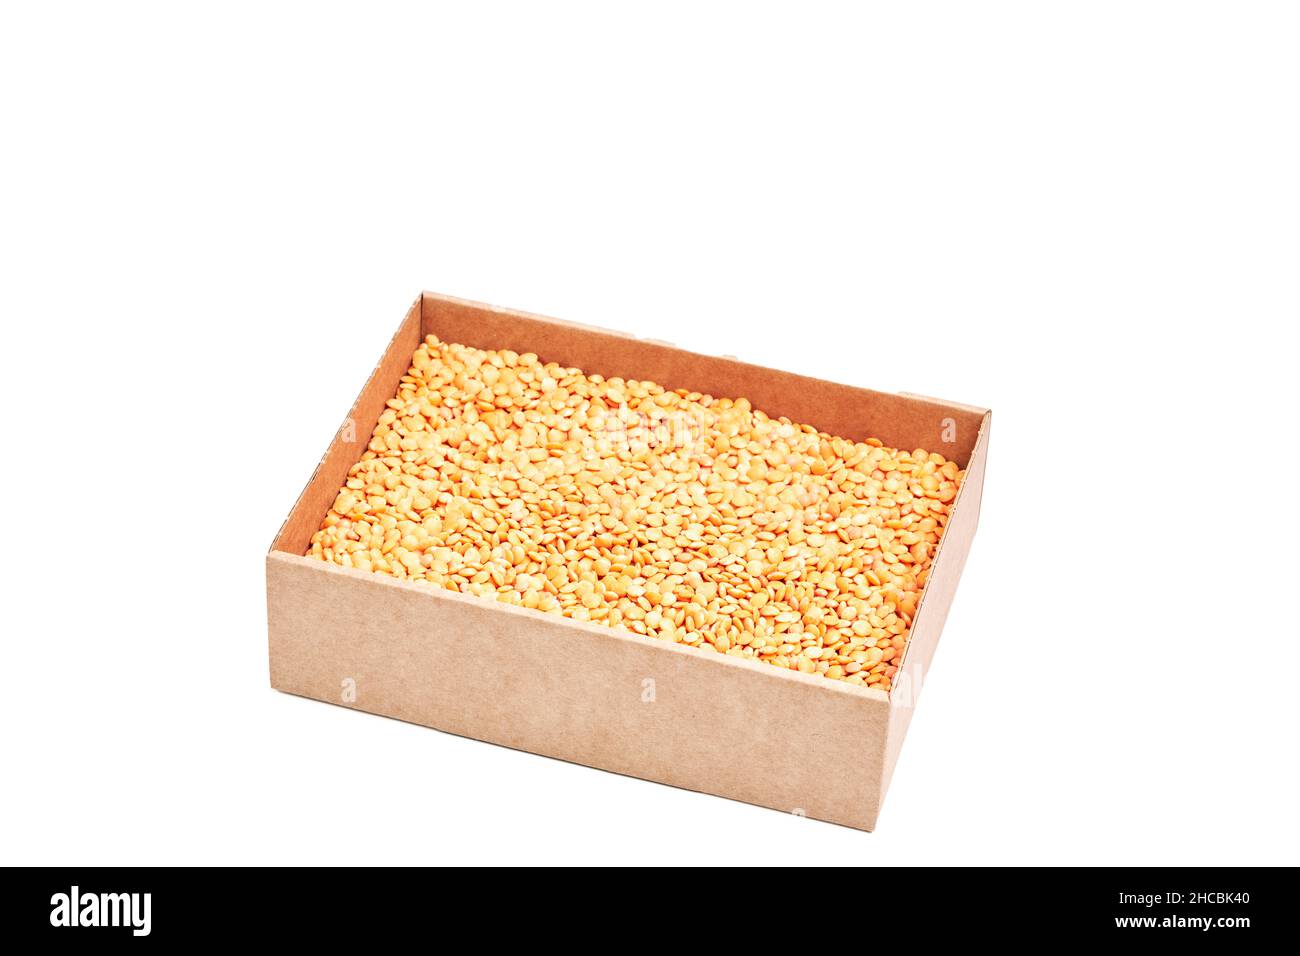 Cardboard box full of raw orange lentils on a white background. Healthy food concept Stock Photo